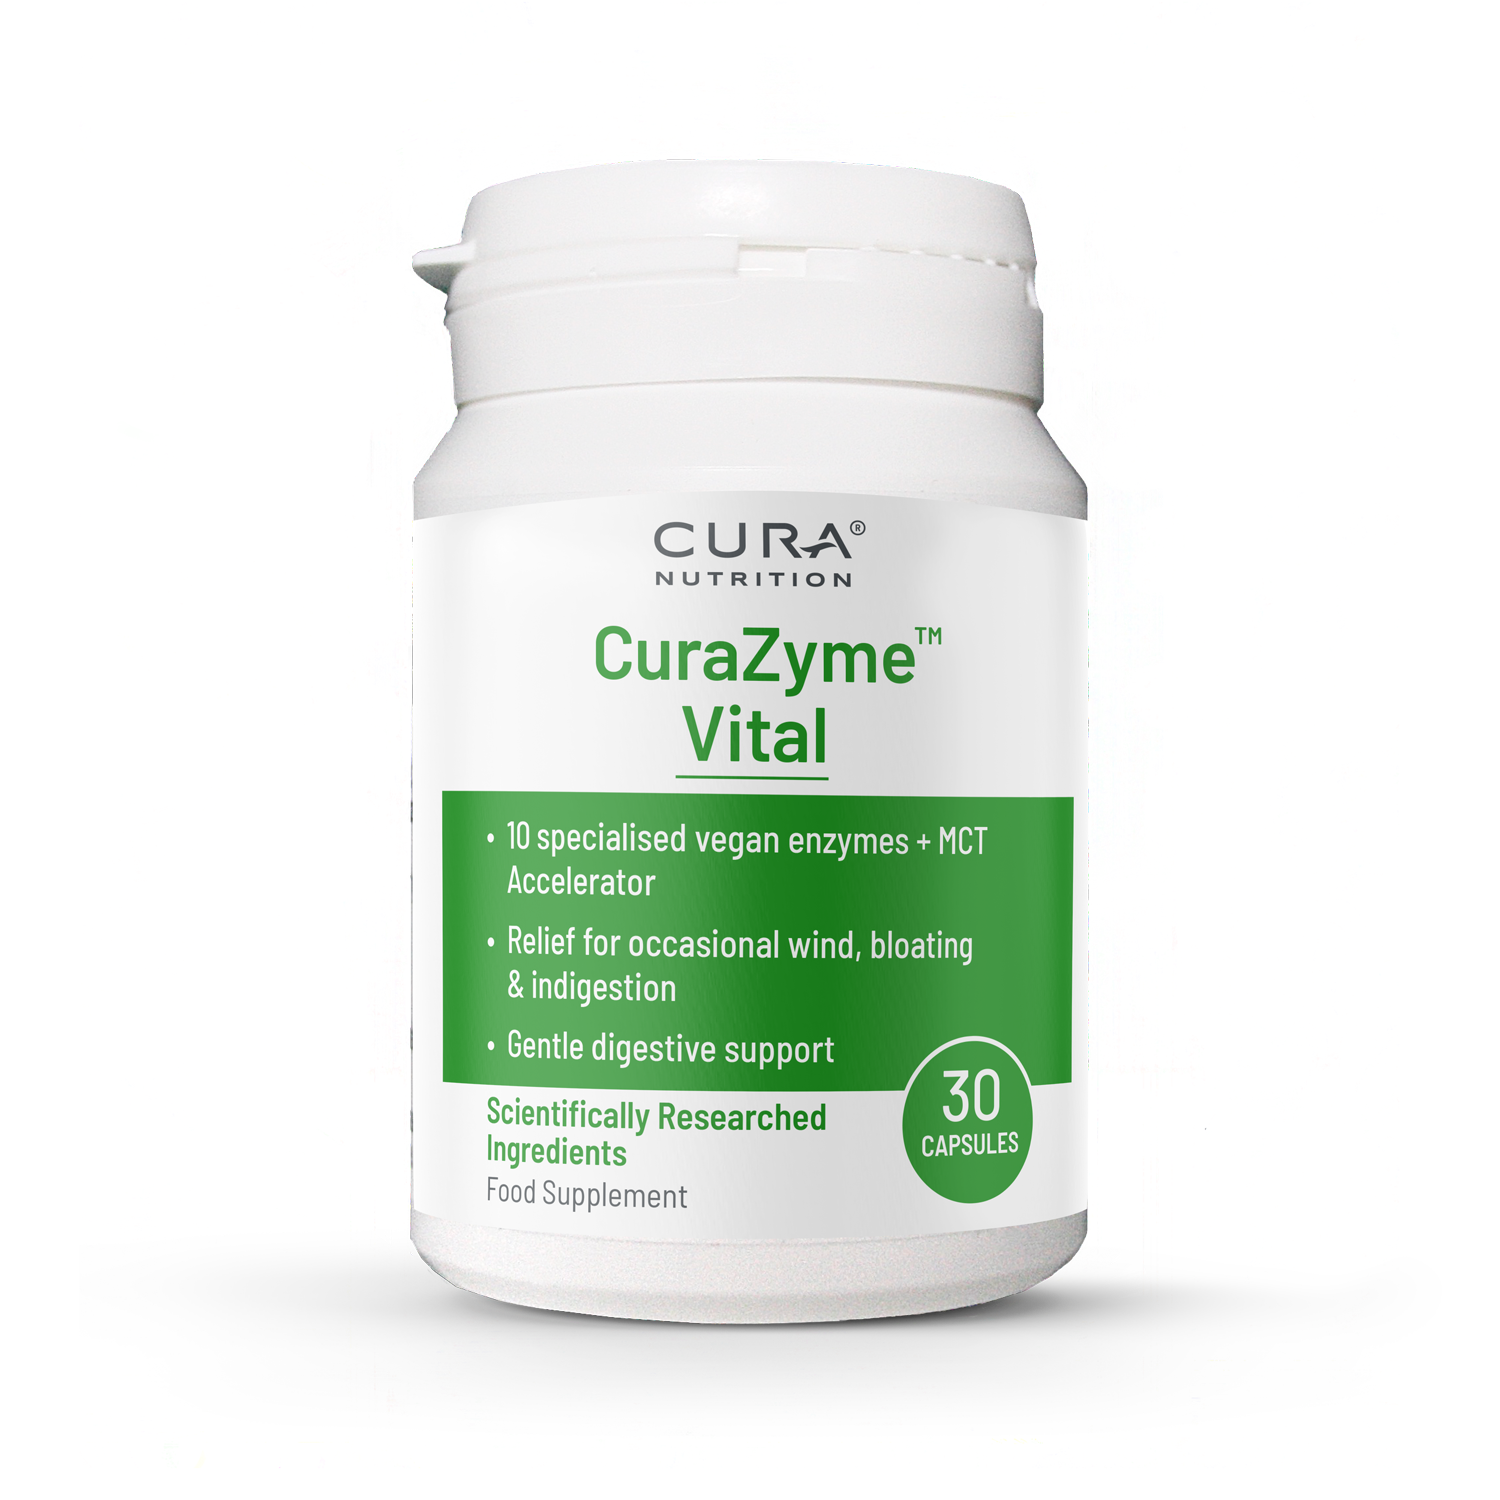 CuraZyme Vital - Gentle Digestive Relief - 30 Capsules | Cura Nutrition